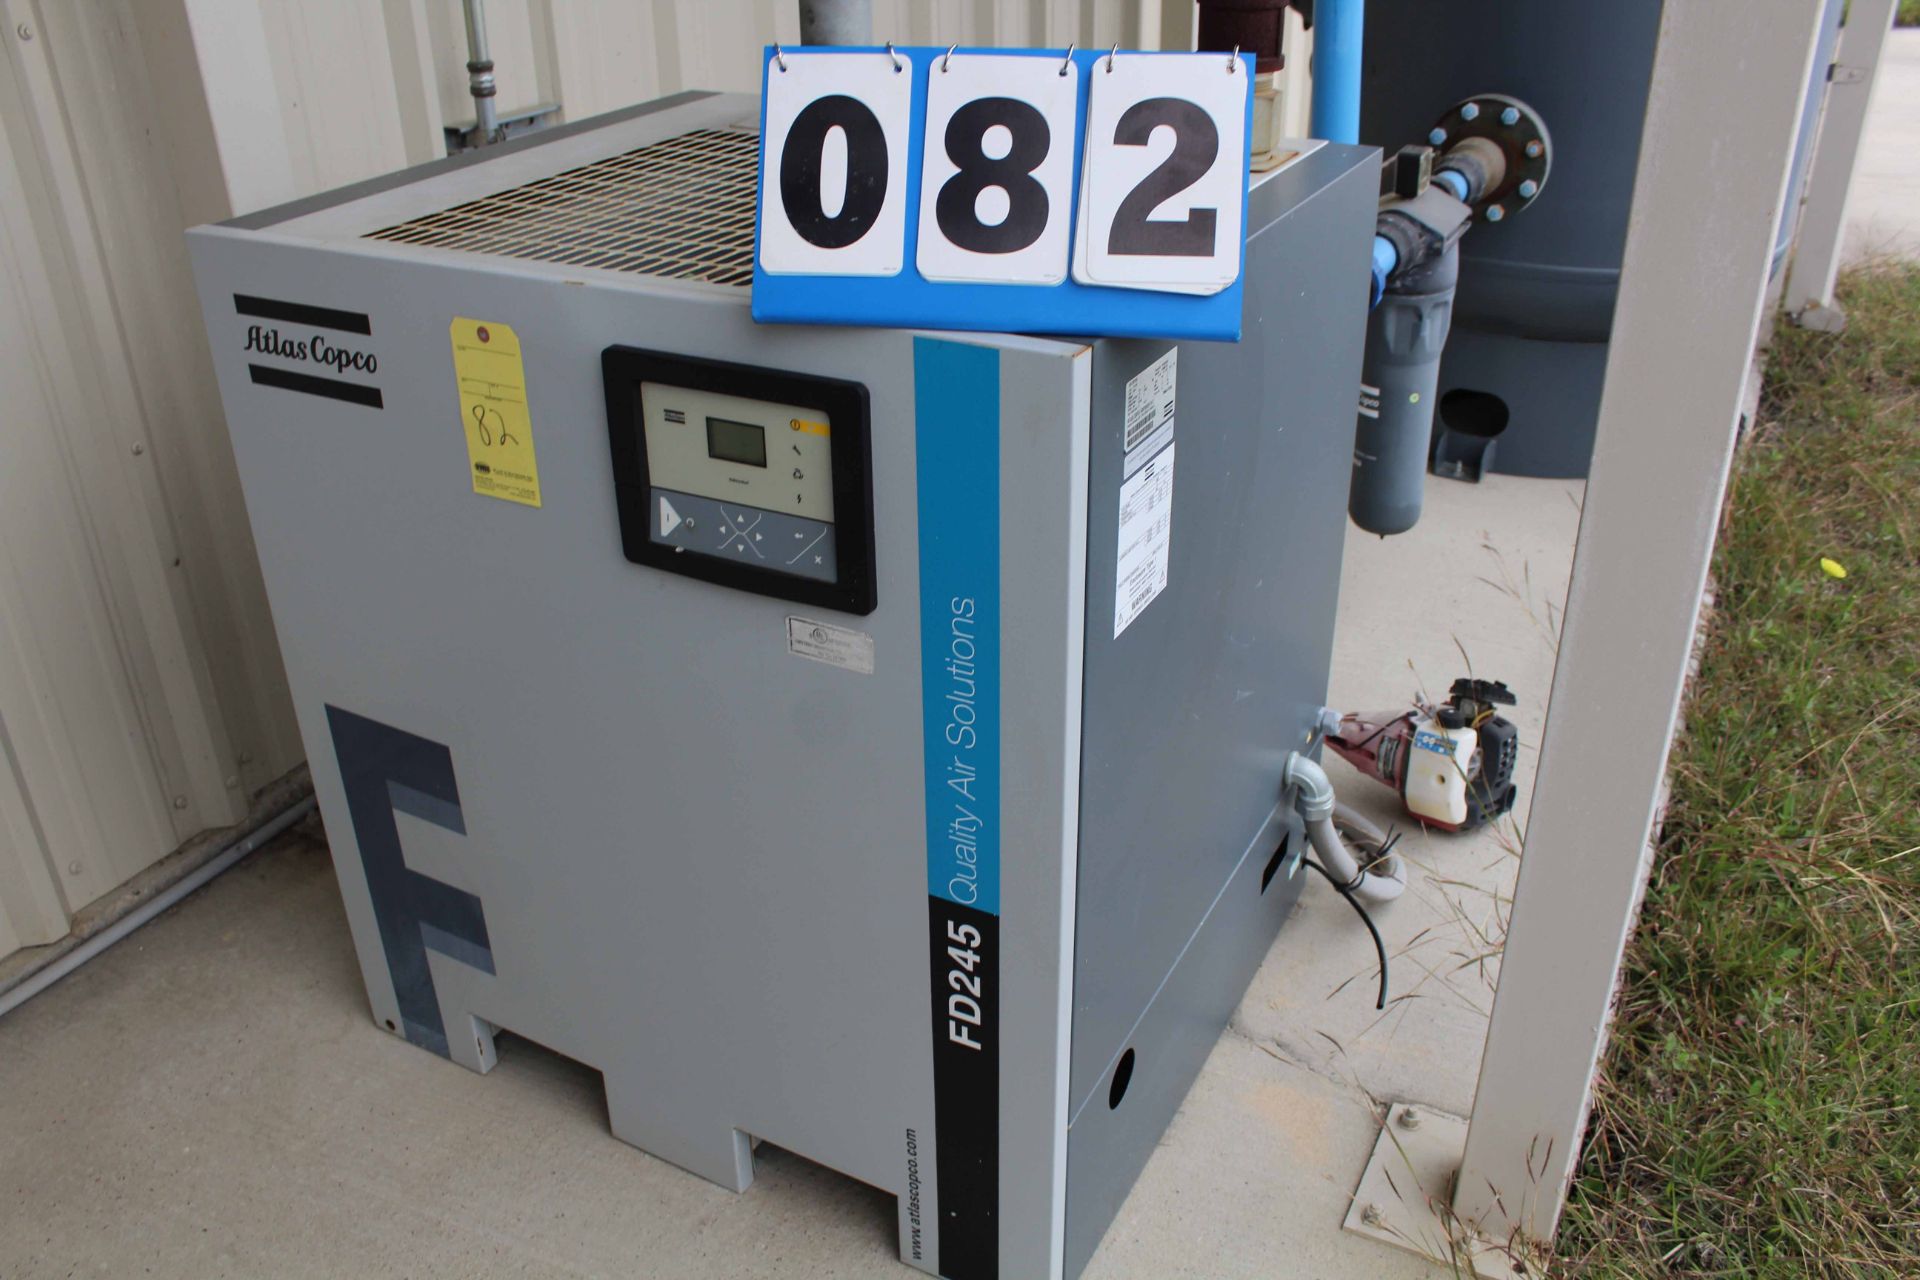 REFRIGERATED AIR DRYER, ATLAS-COPCO MDL. FD245, new 2014, 203 PSI max. working pressure, S/N